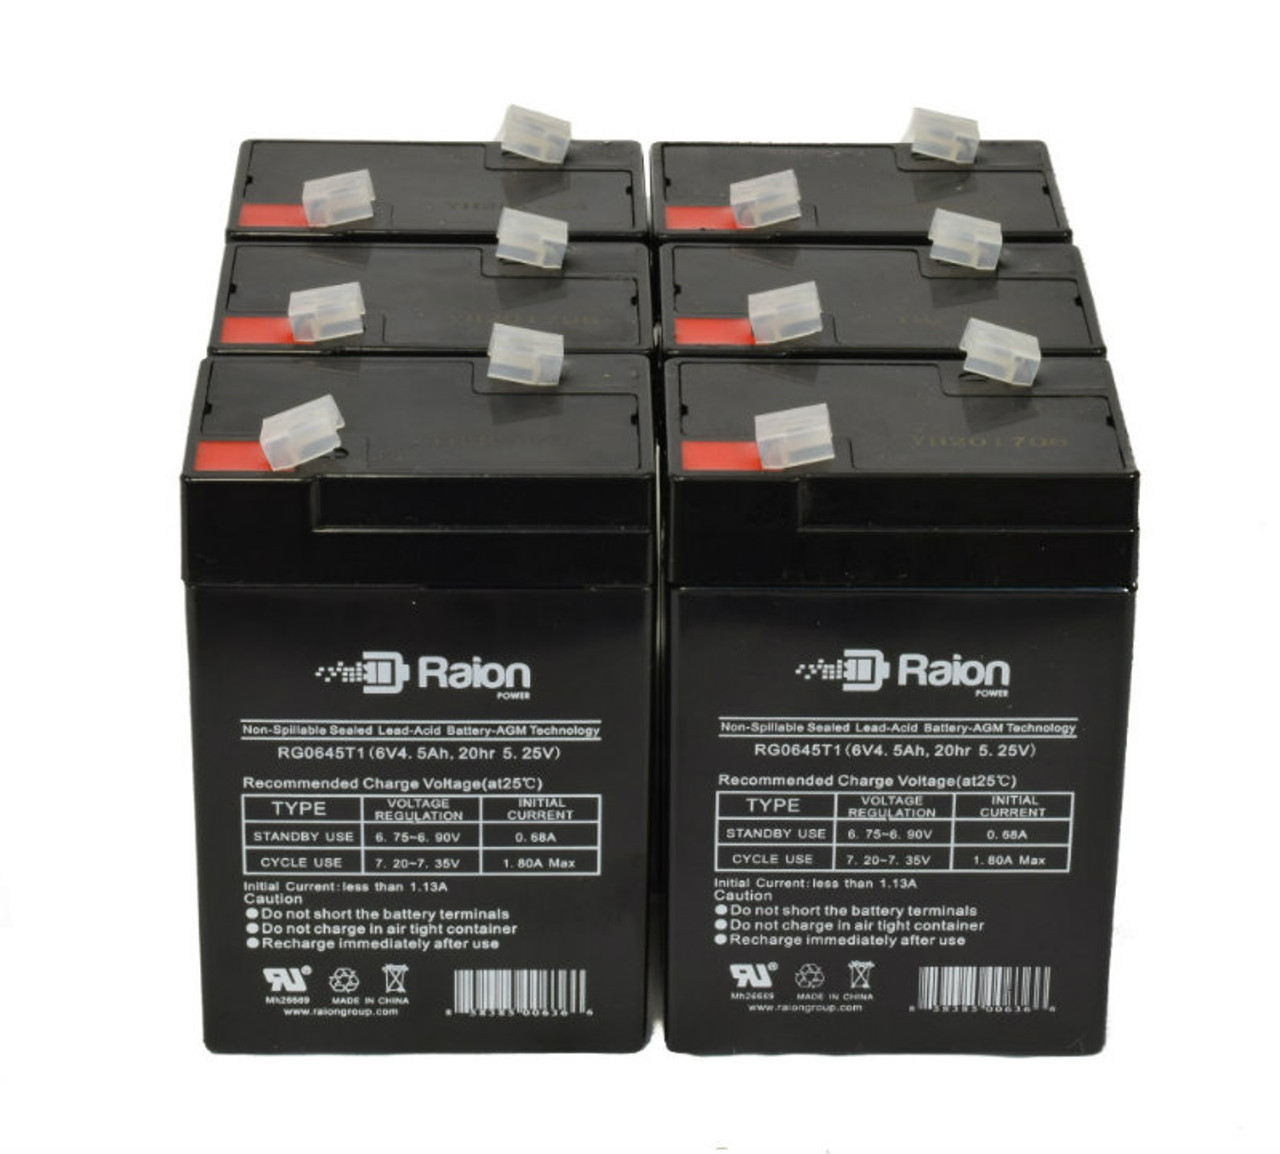 Raion Power 6 Volt 4.5Ah RG0645T1 Replacement Battery for LCB ES4-6 - 6 Pack